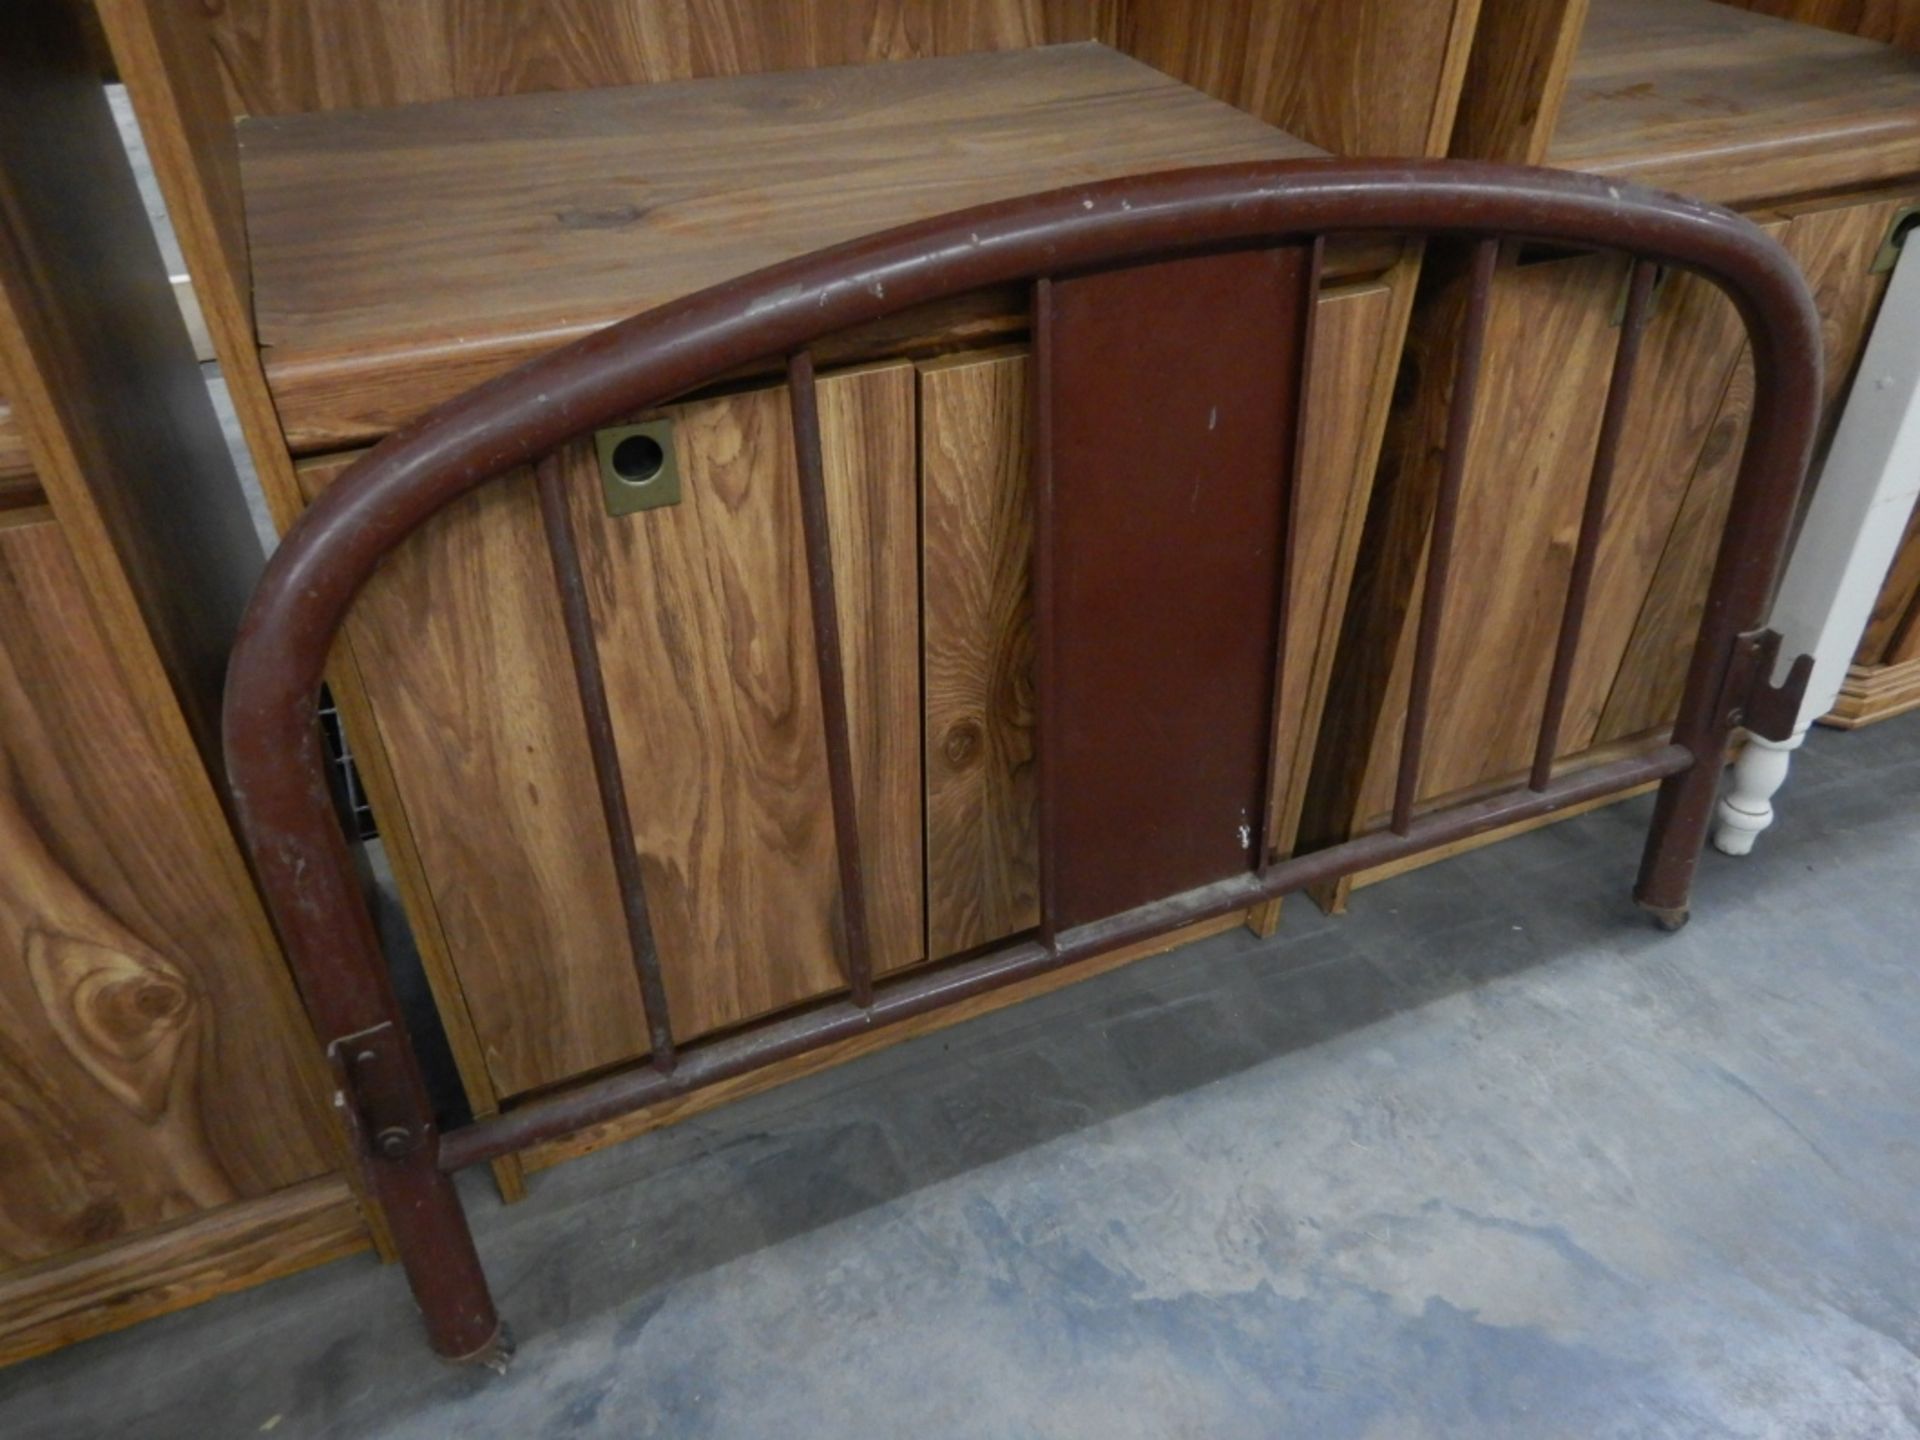 ANTIQUE METAL HEADBOARD W/FOOTBOARD FOR DOUBLE BED - CHOCOLATE BROWN - Image 2 of 2